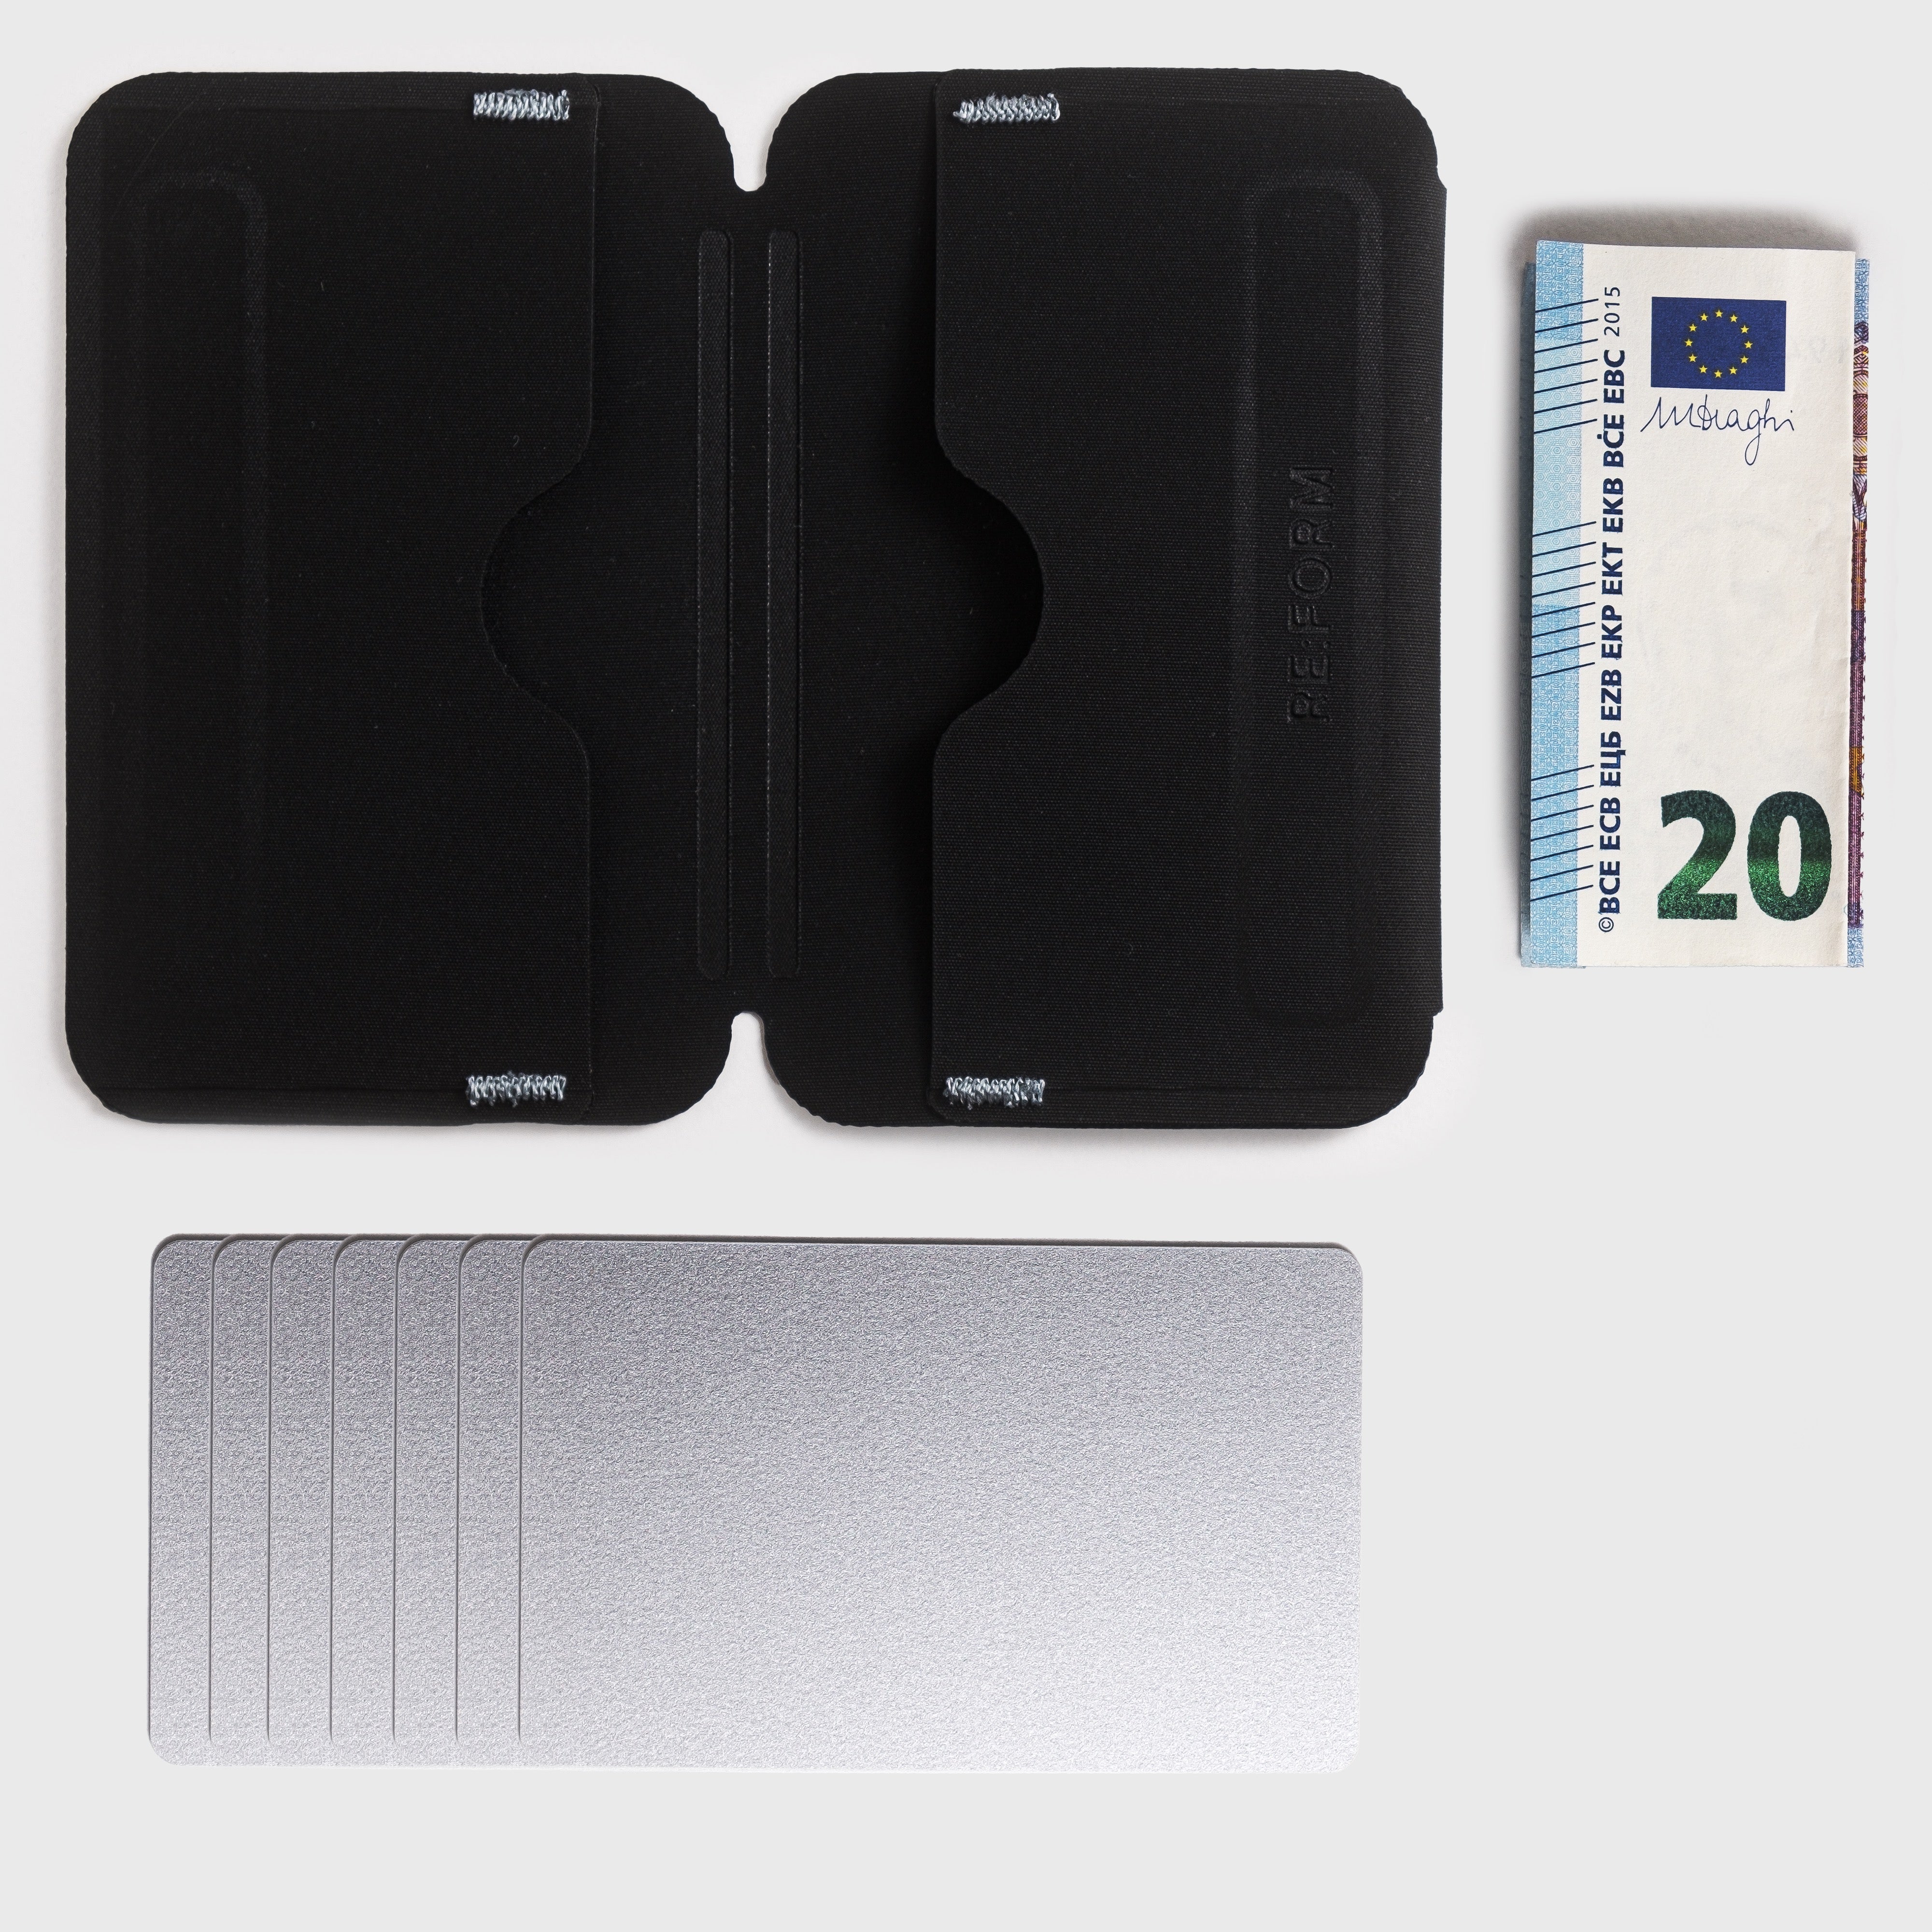 Cards and Cash fit into the RE:FORM RE:02 Minimalist Card Holder with Magnetic Closure